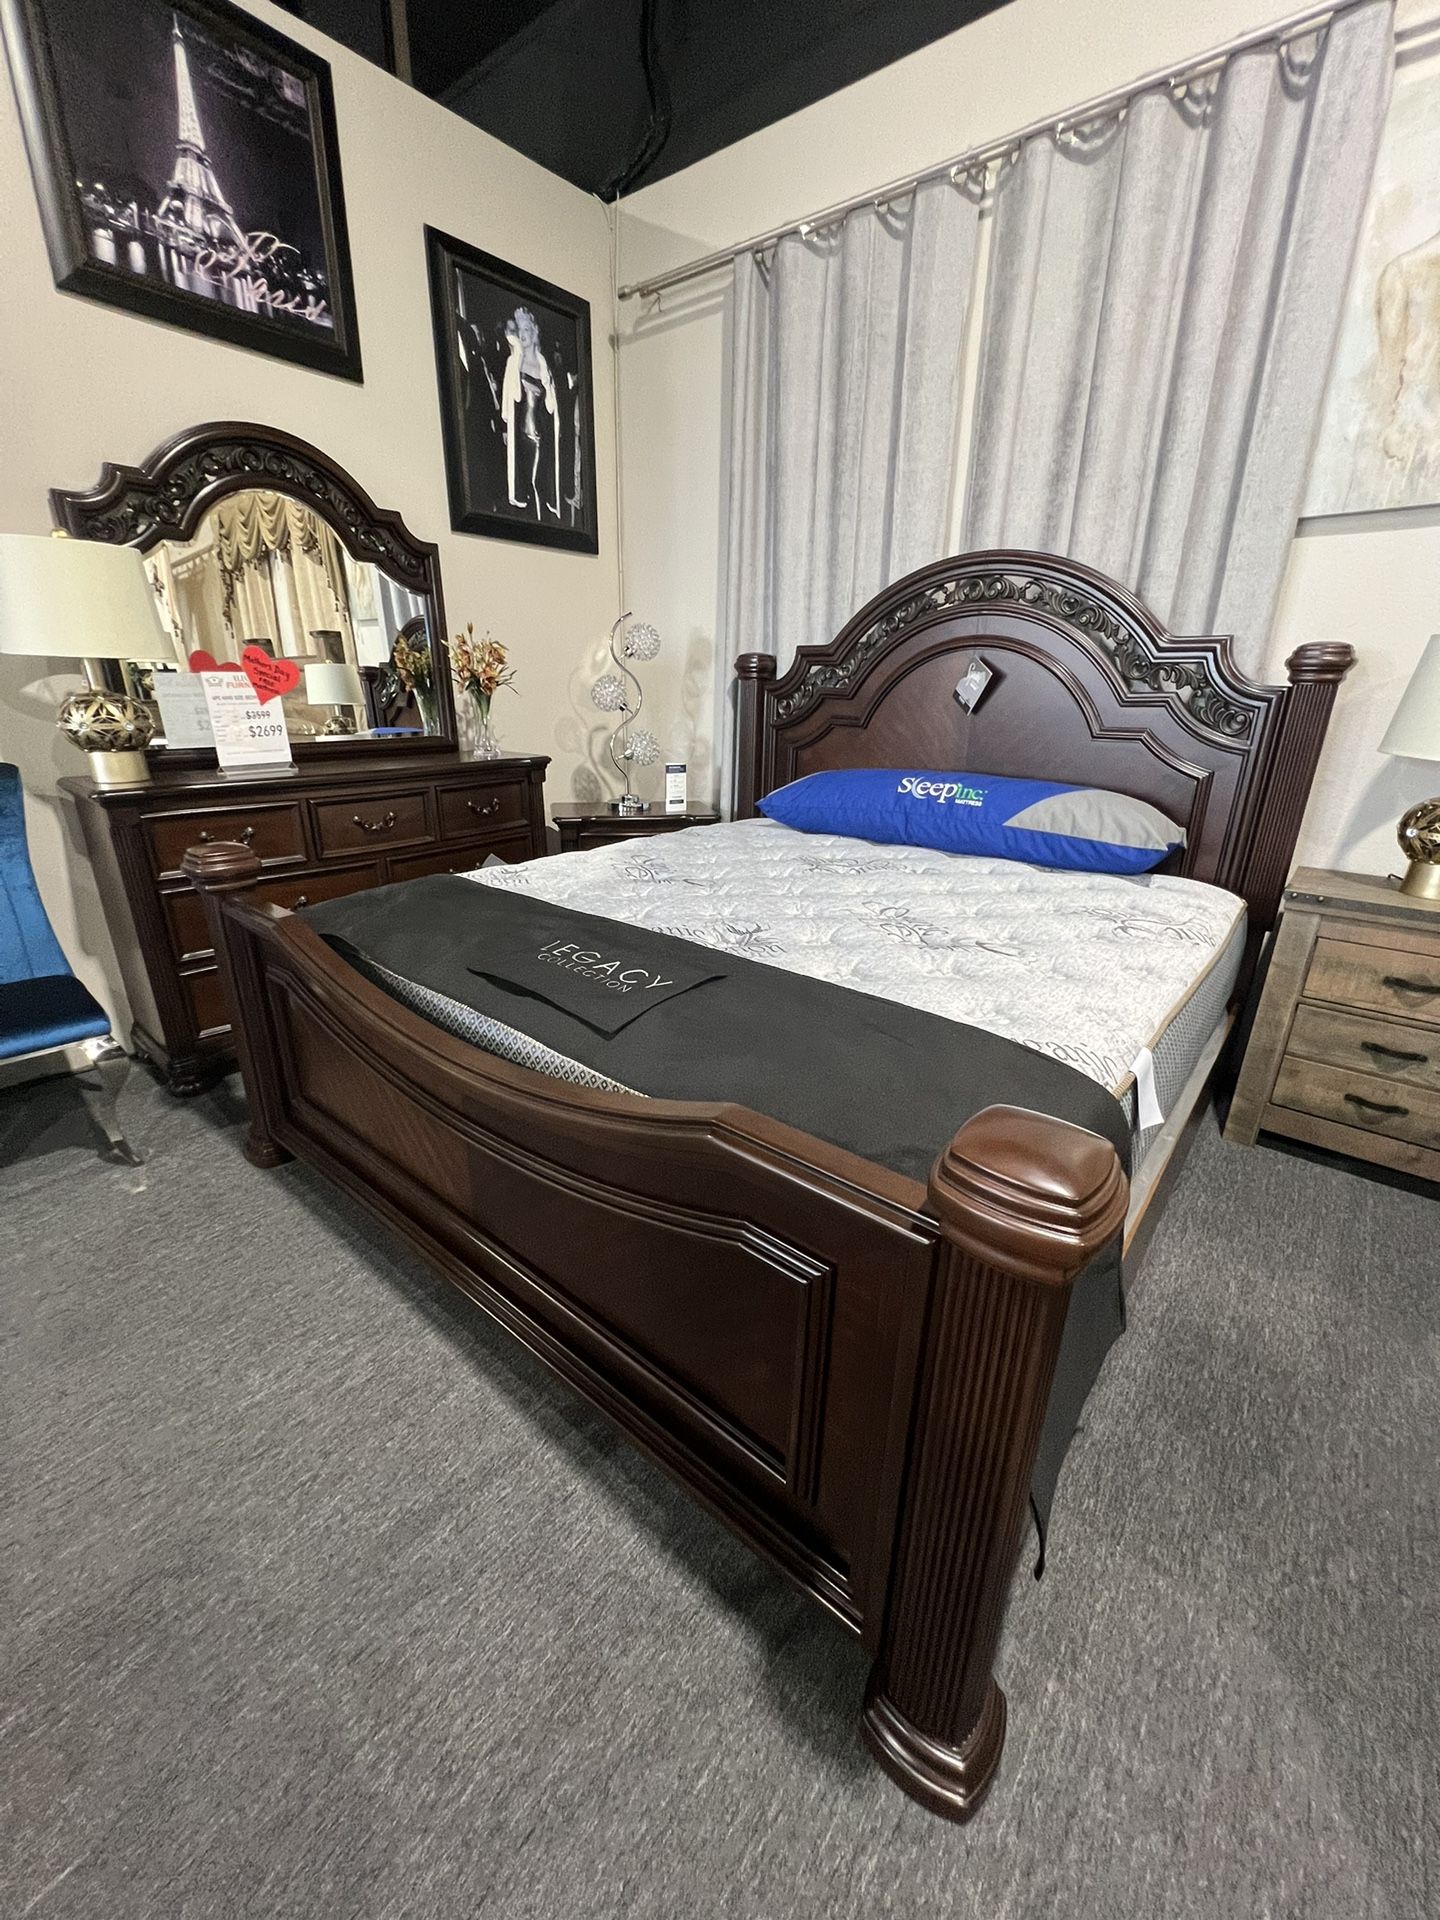 4 Pc King Bedroom Set🎈🎈🎈 With Free Mattress 